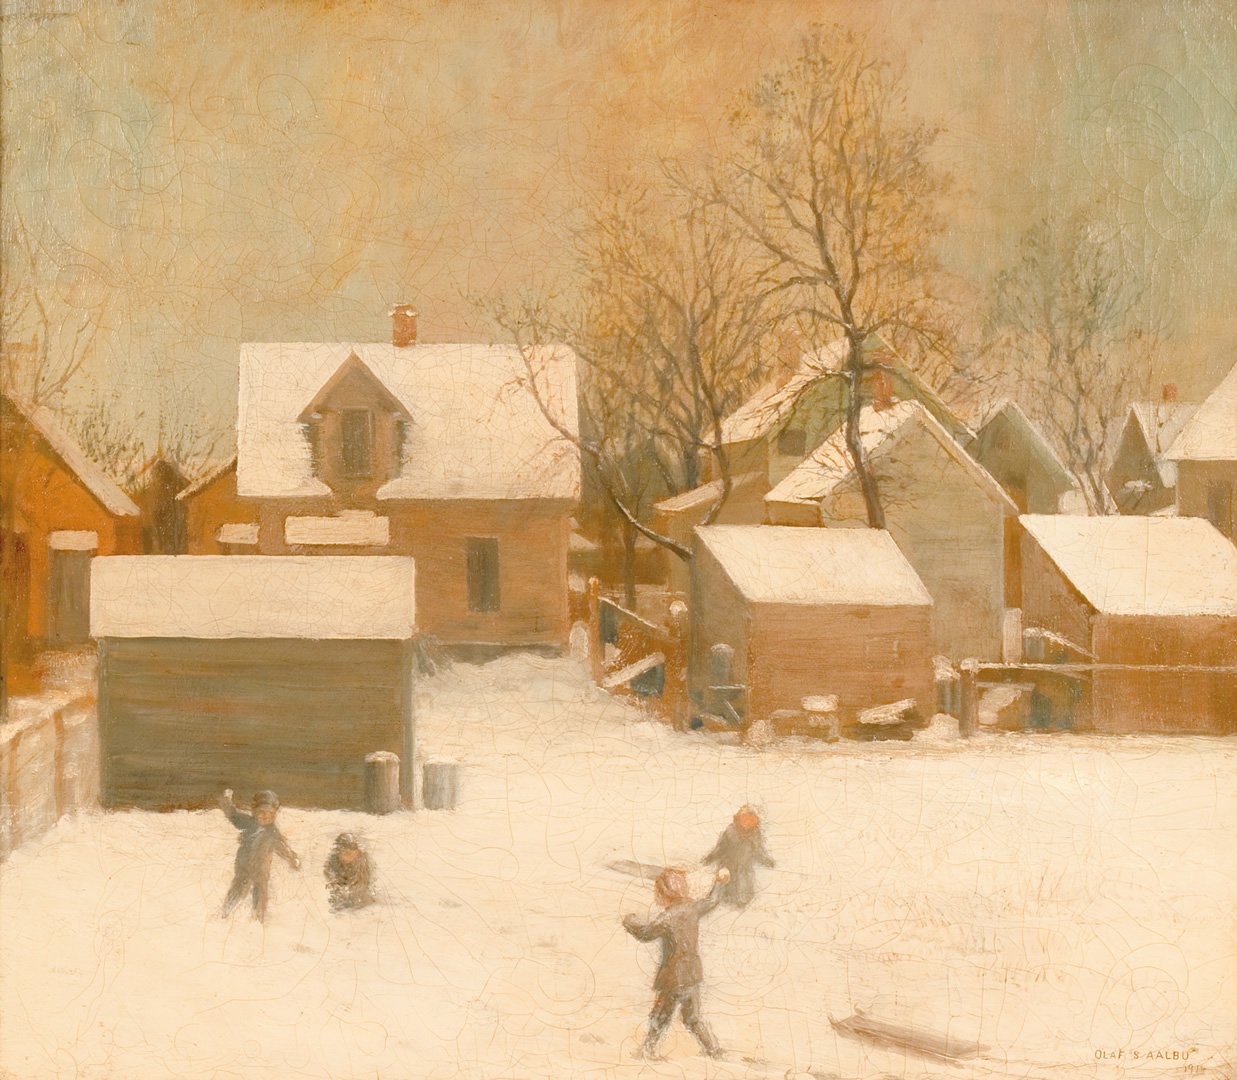 Giclée Print from Vesterheim's Collections - City Snow with Children by Olaf Aalbu 8" x 10"